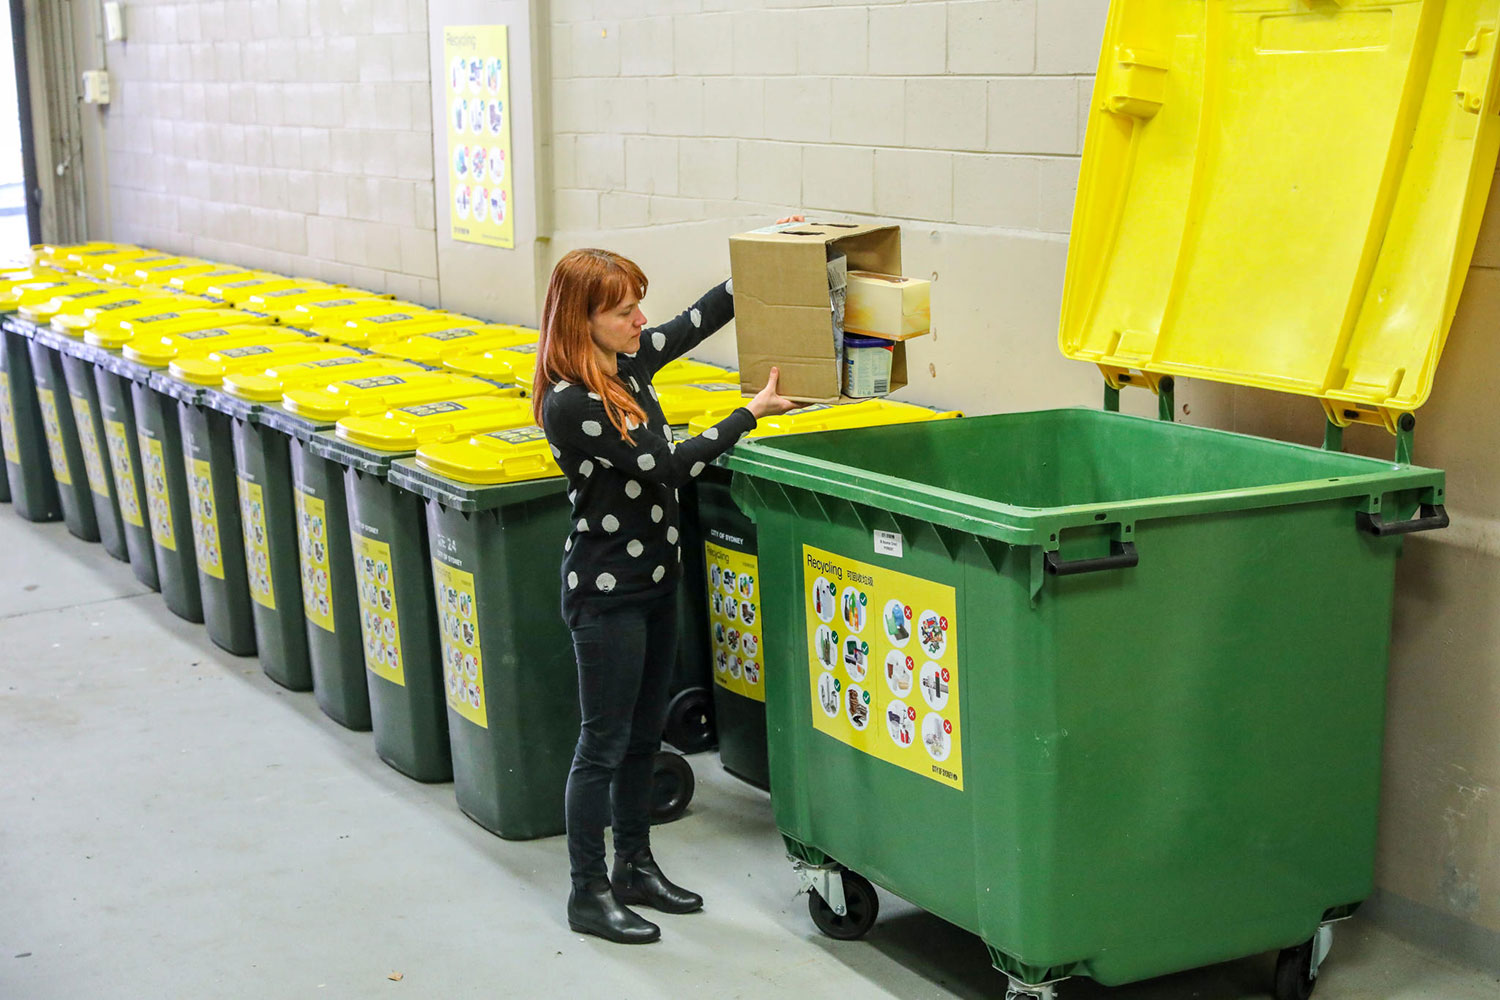 How To Find The Recycling Bin